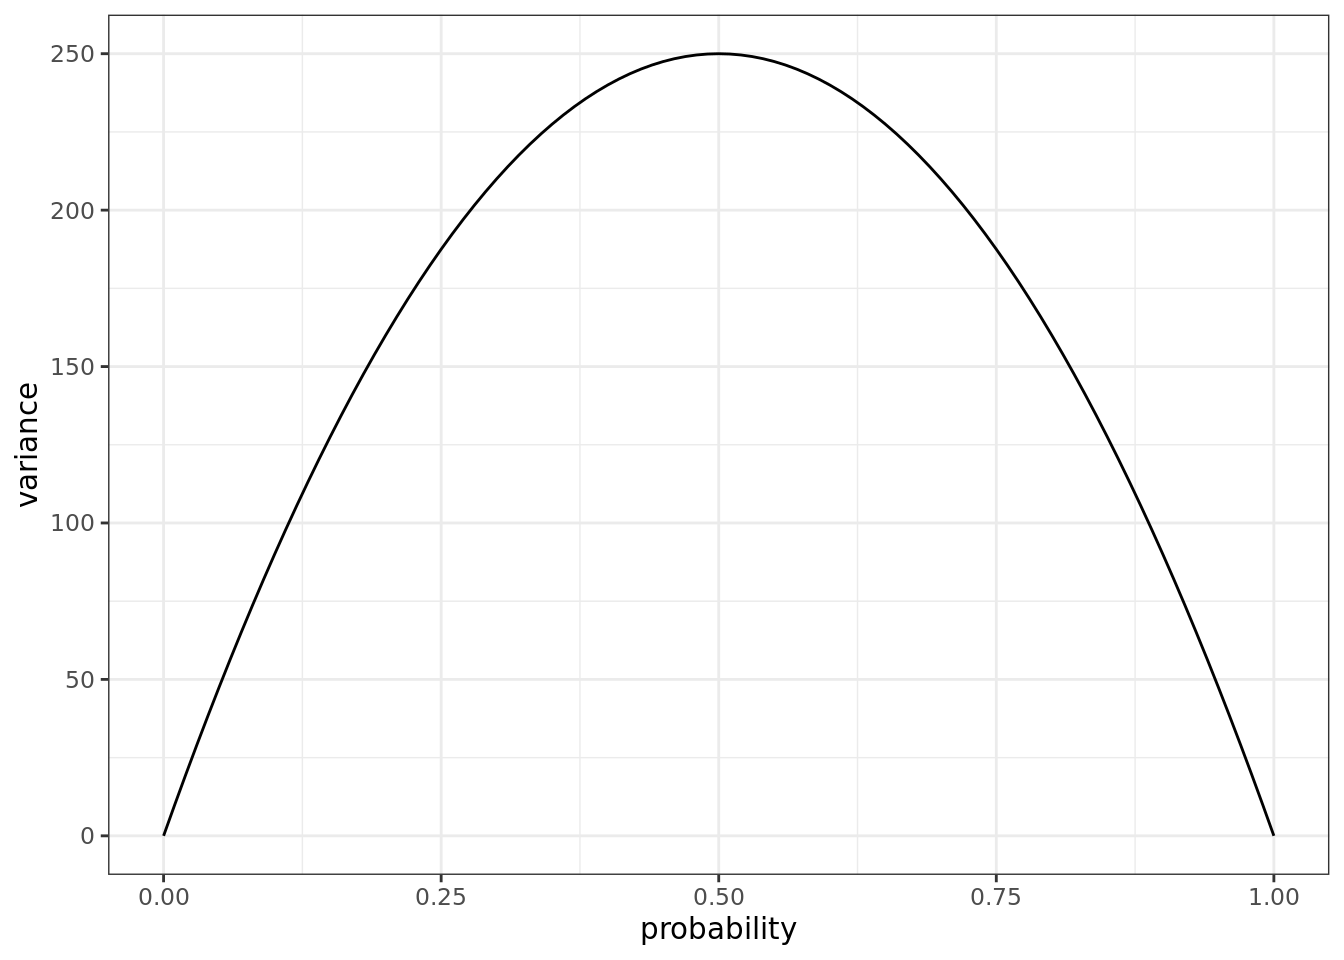 Plot of variance versus probability, with sample size $n = 1000$.